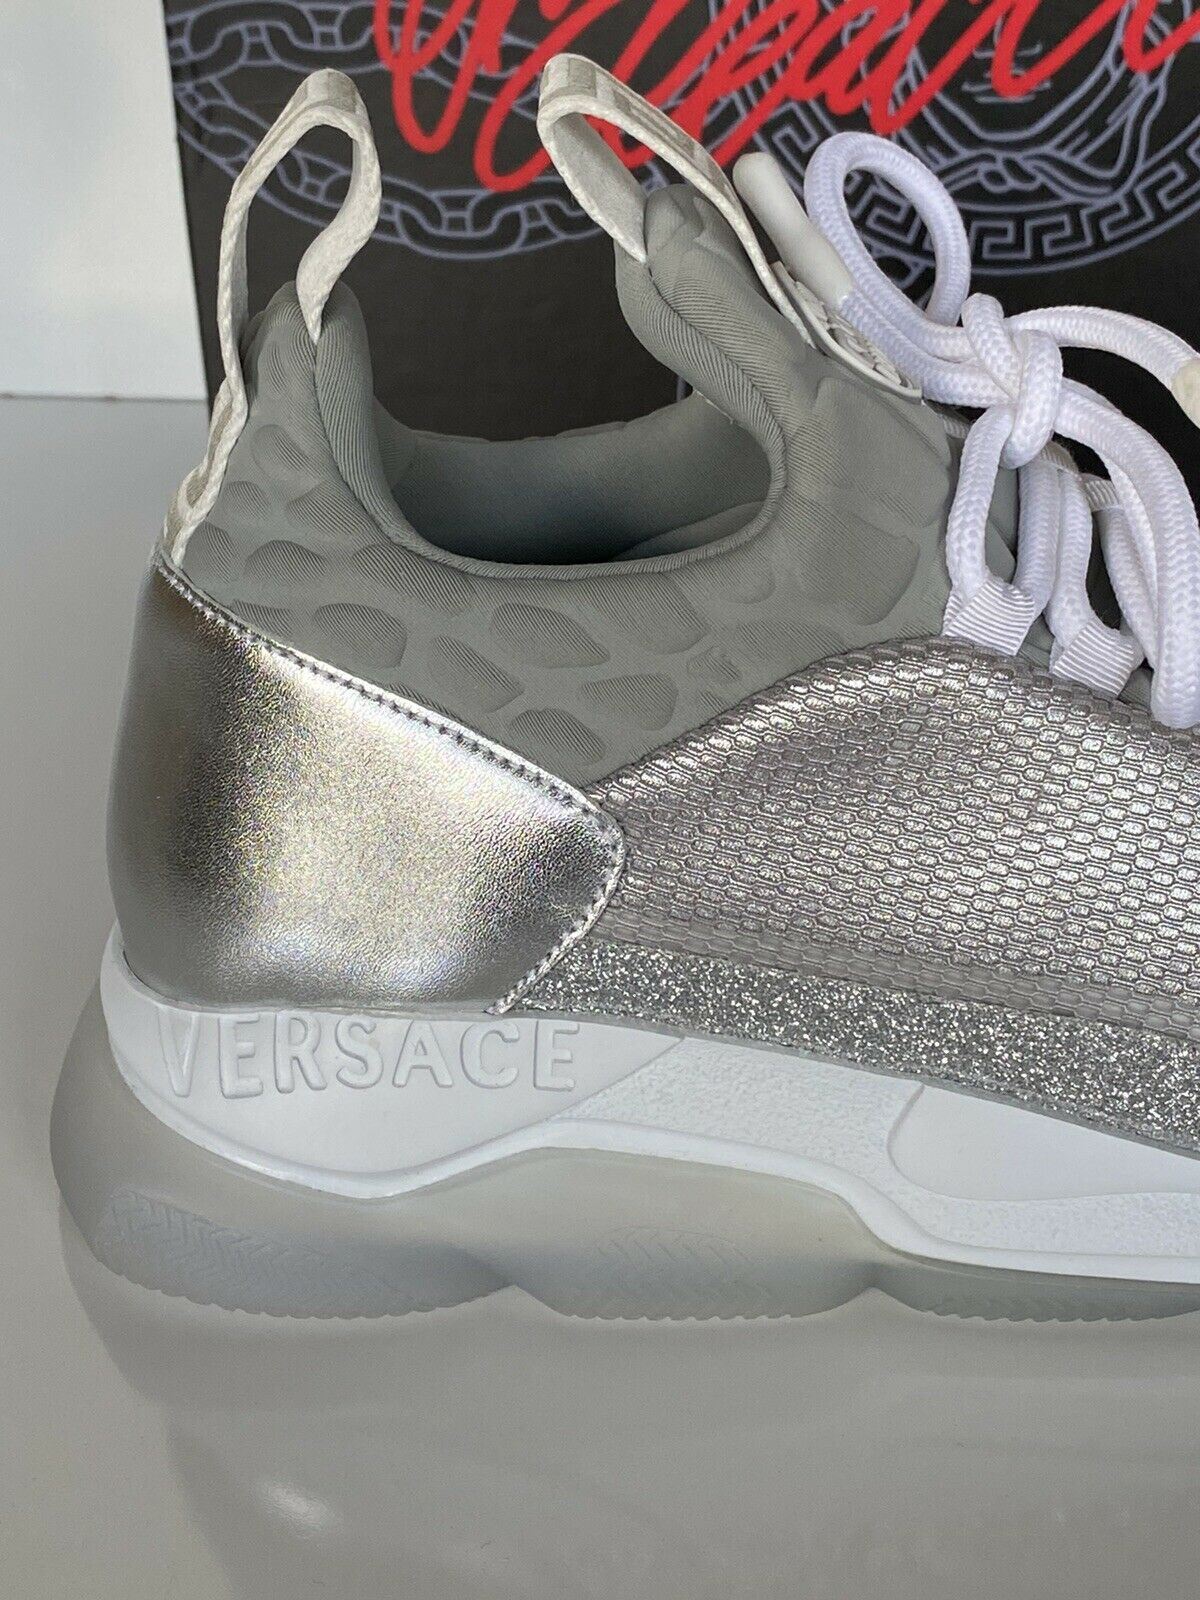 NIB Versace Silver Sparkle Chain Reaction Sneakers 8.5 US (38.5) Made in Italy